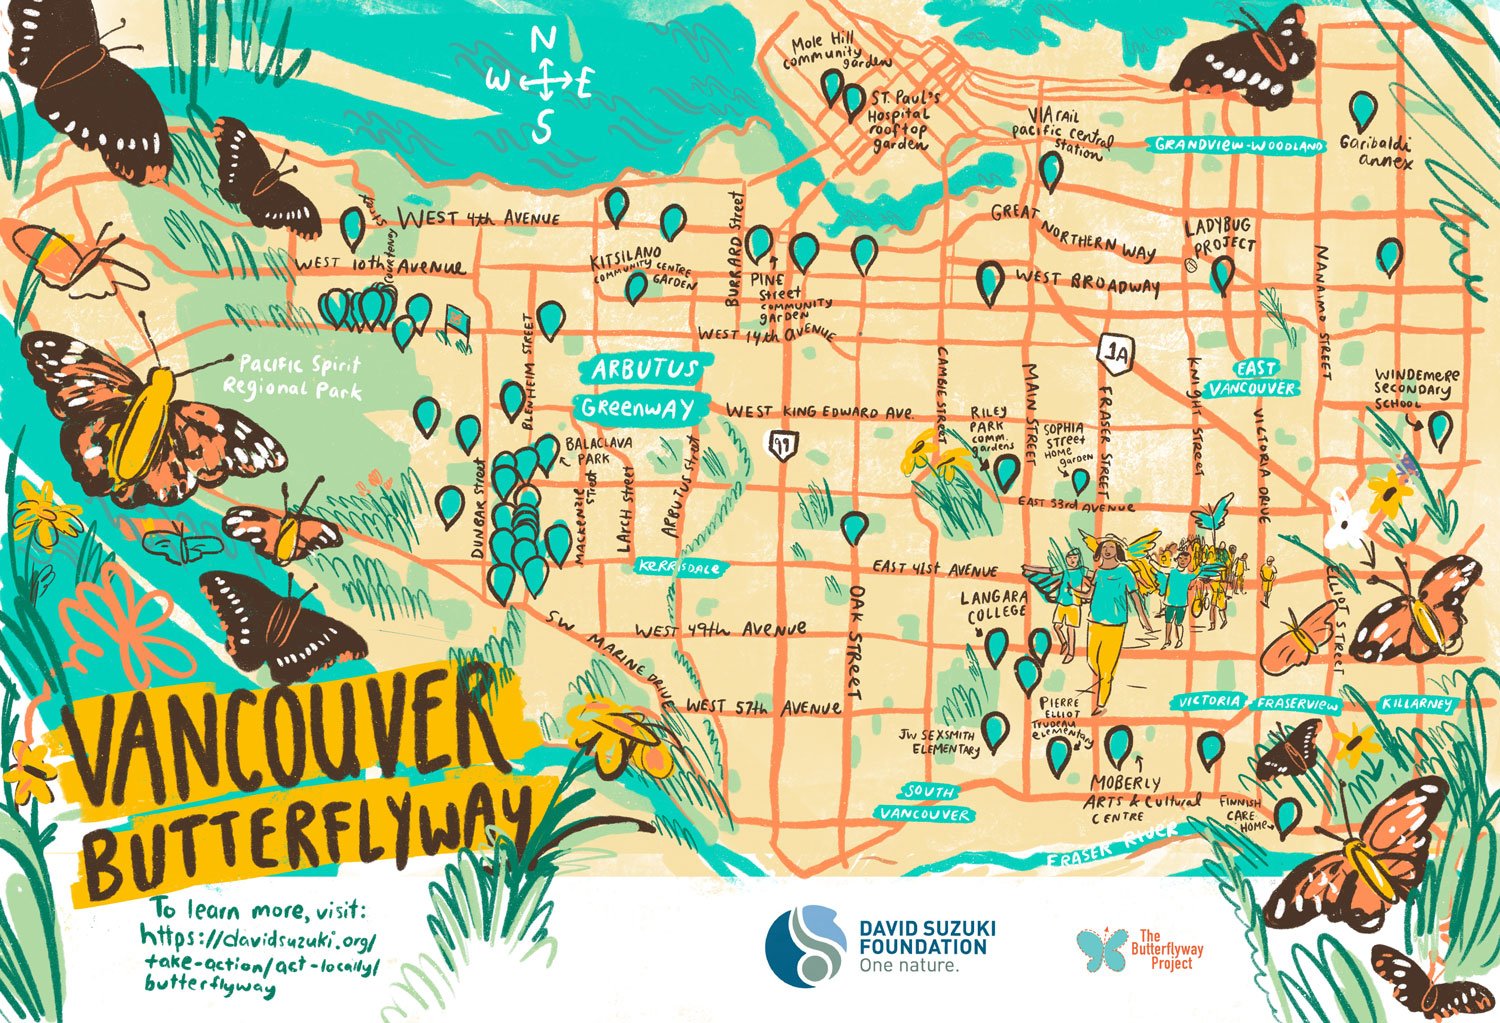 Illustrated map of Butterflyway locations in Vancouver